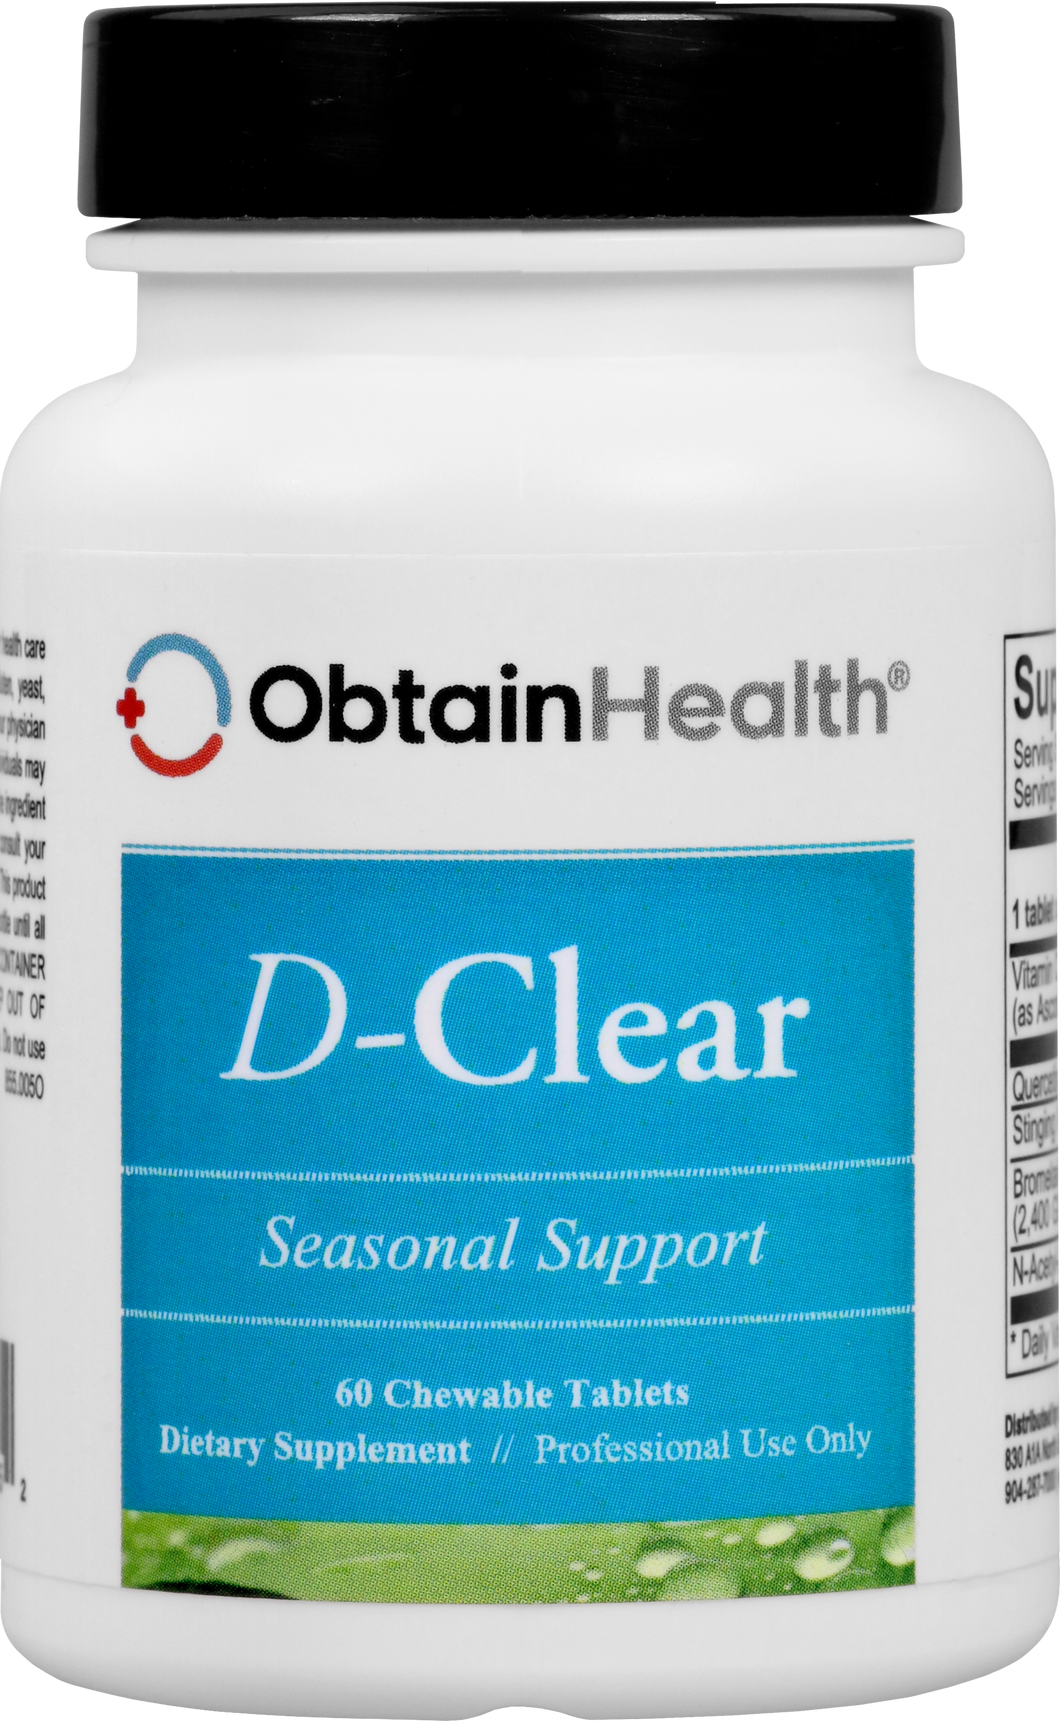 Seasonal Support (formerly D-Clear)